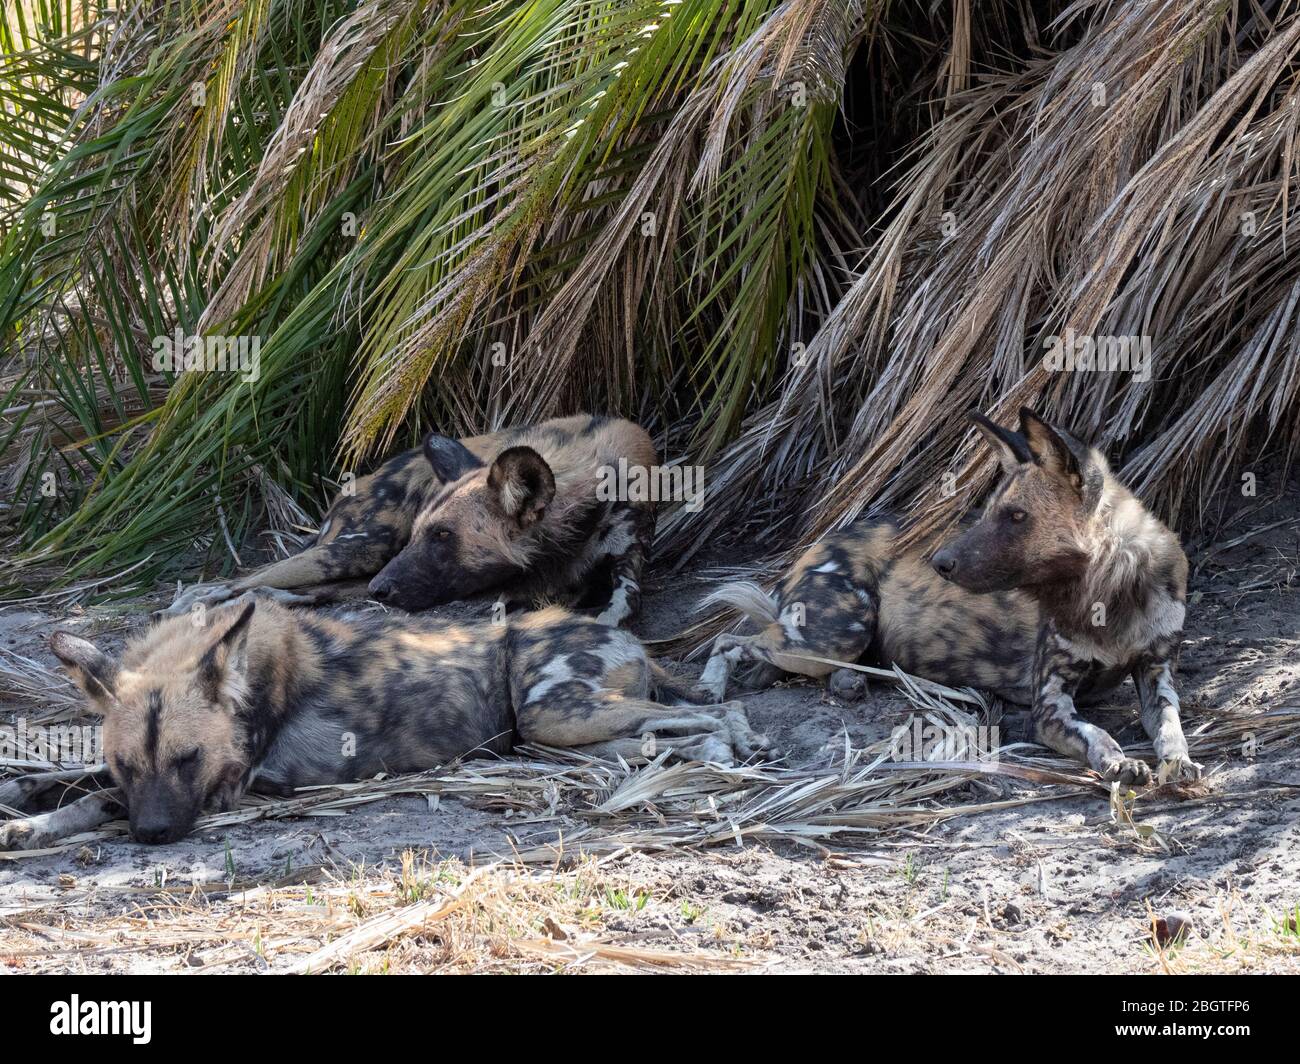 Adult wild dogs, Lycaon pictus, resting after a hunt in the Okavango Delta, Botswana, South Africa Stock Photo